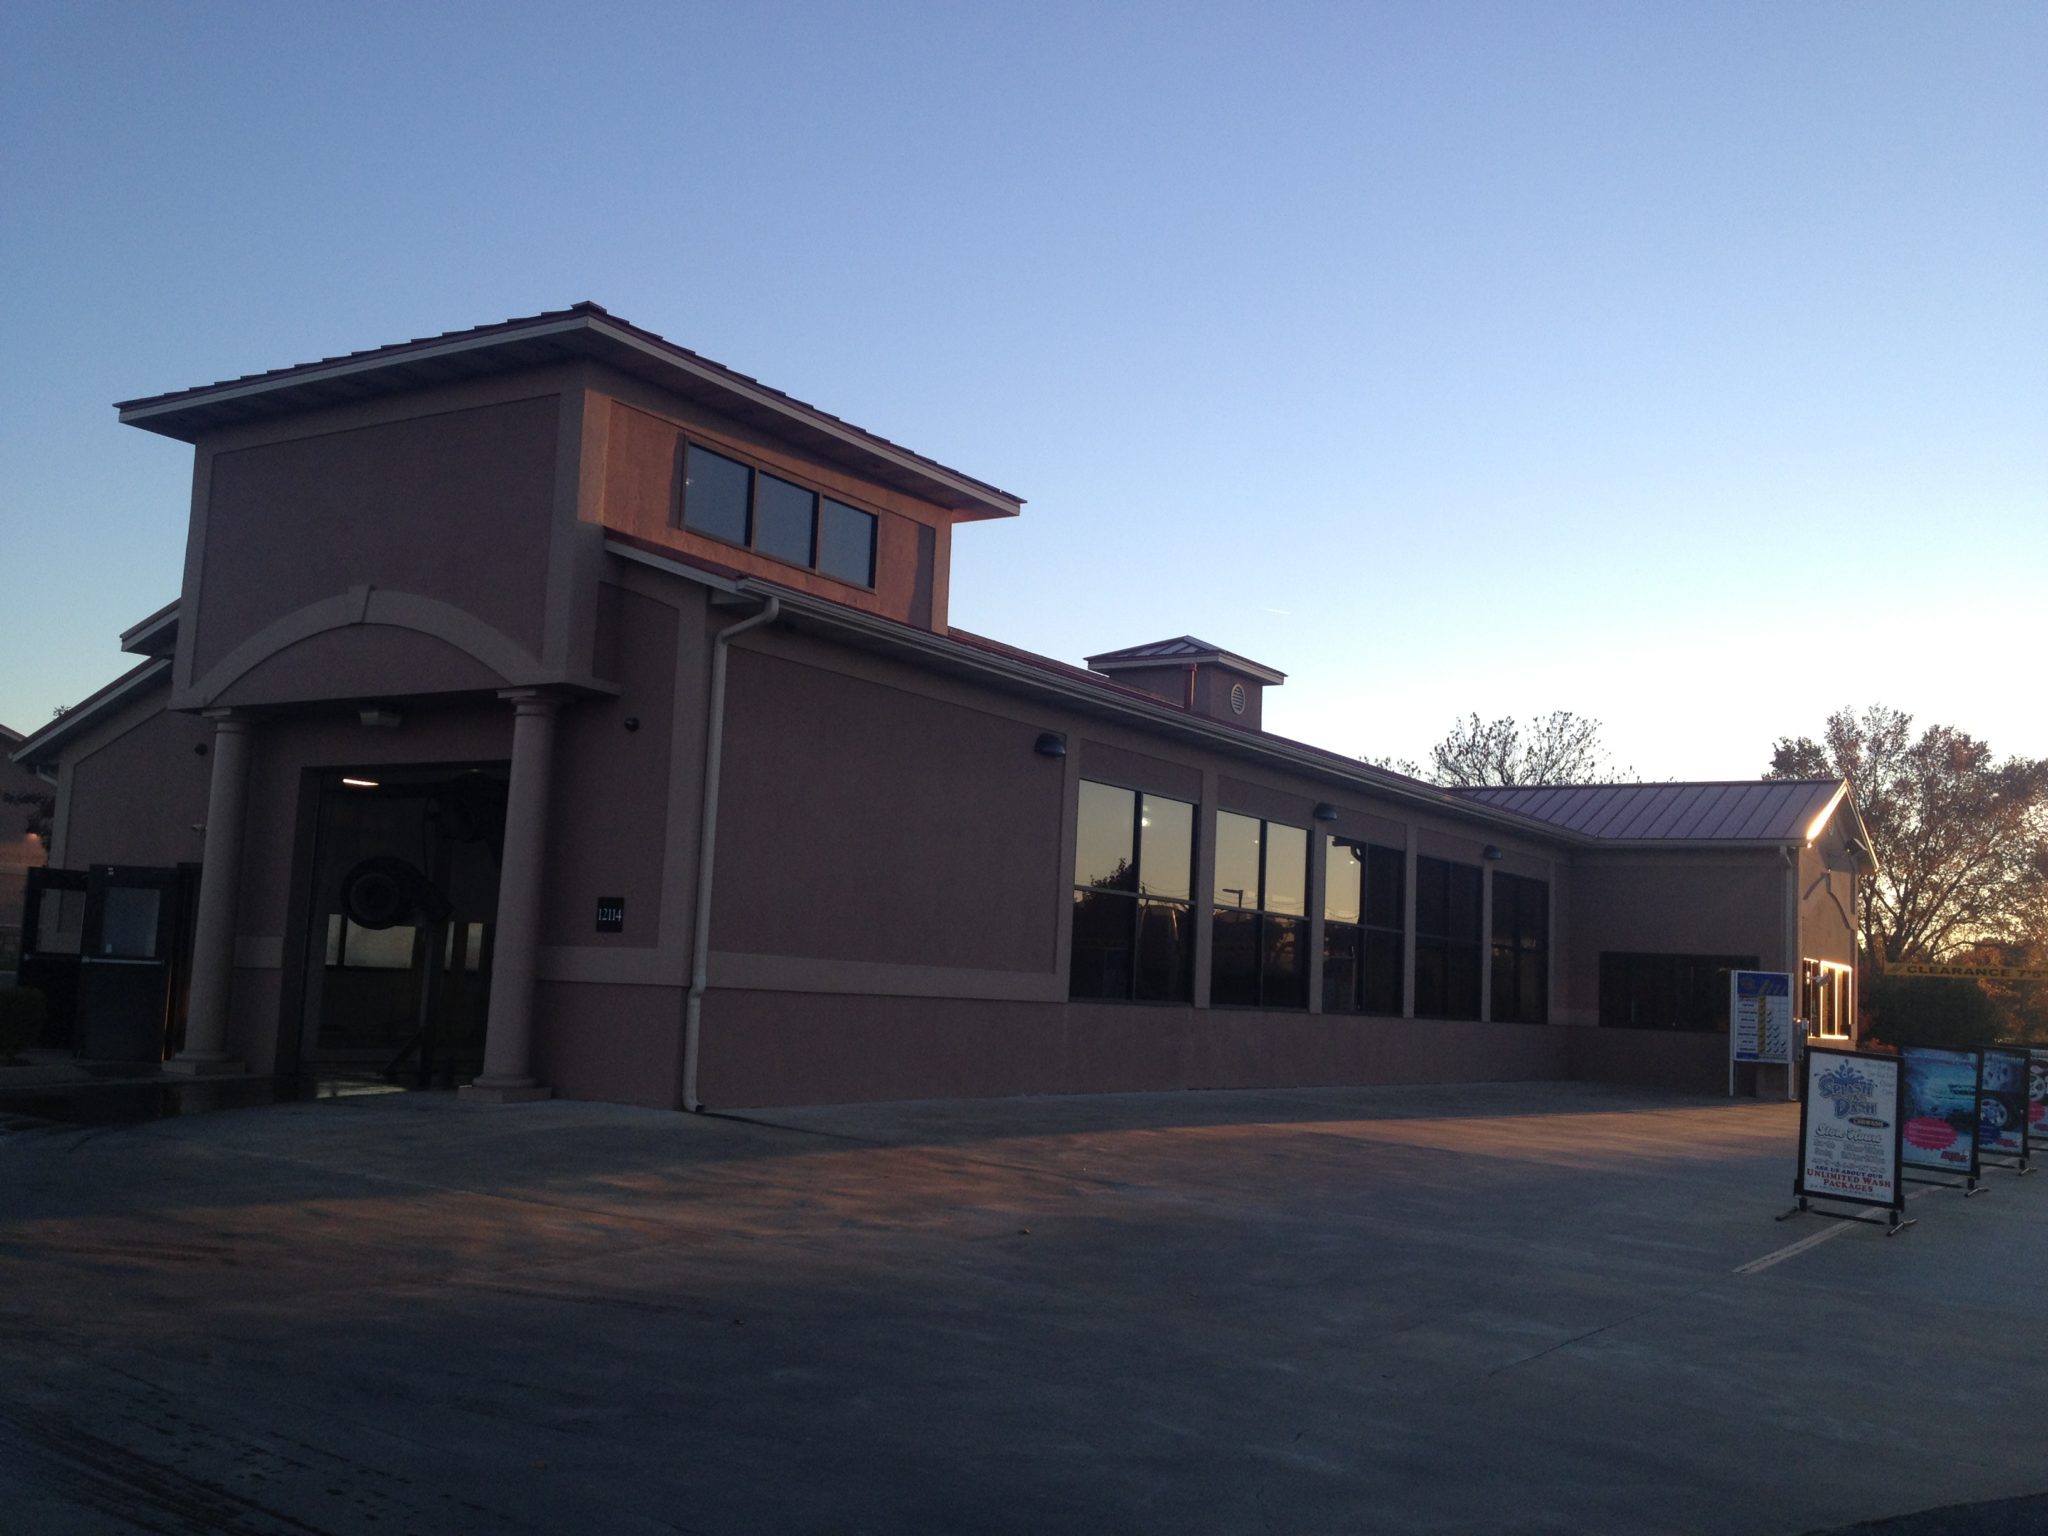 Car wash commercial building with a standing seam metal roof in red